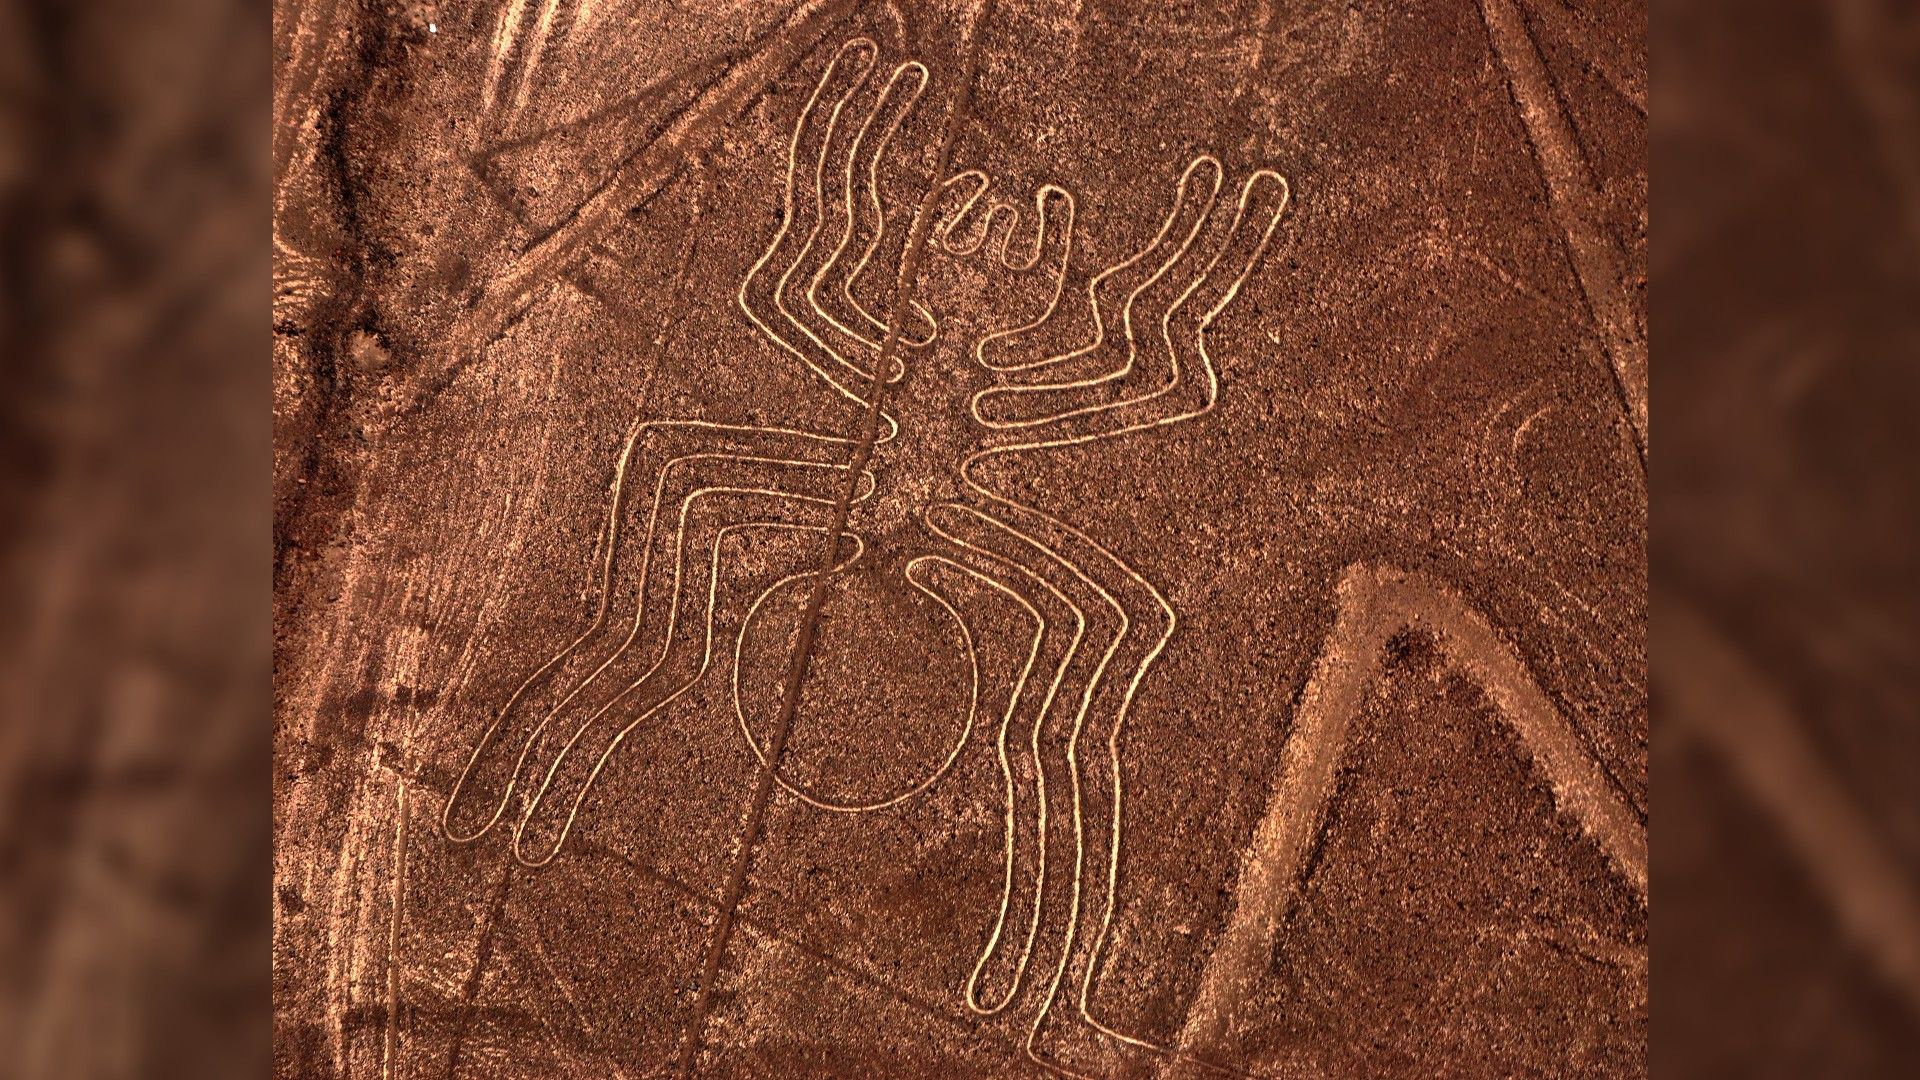 <p>                     Not all of the geoglyphs have direct meanings. Case in point: the spider. Some researchers think ancient people created this line drawing as a plea for rain, according to National Geographic.                   </p>